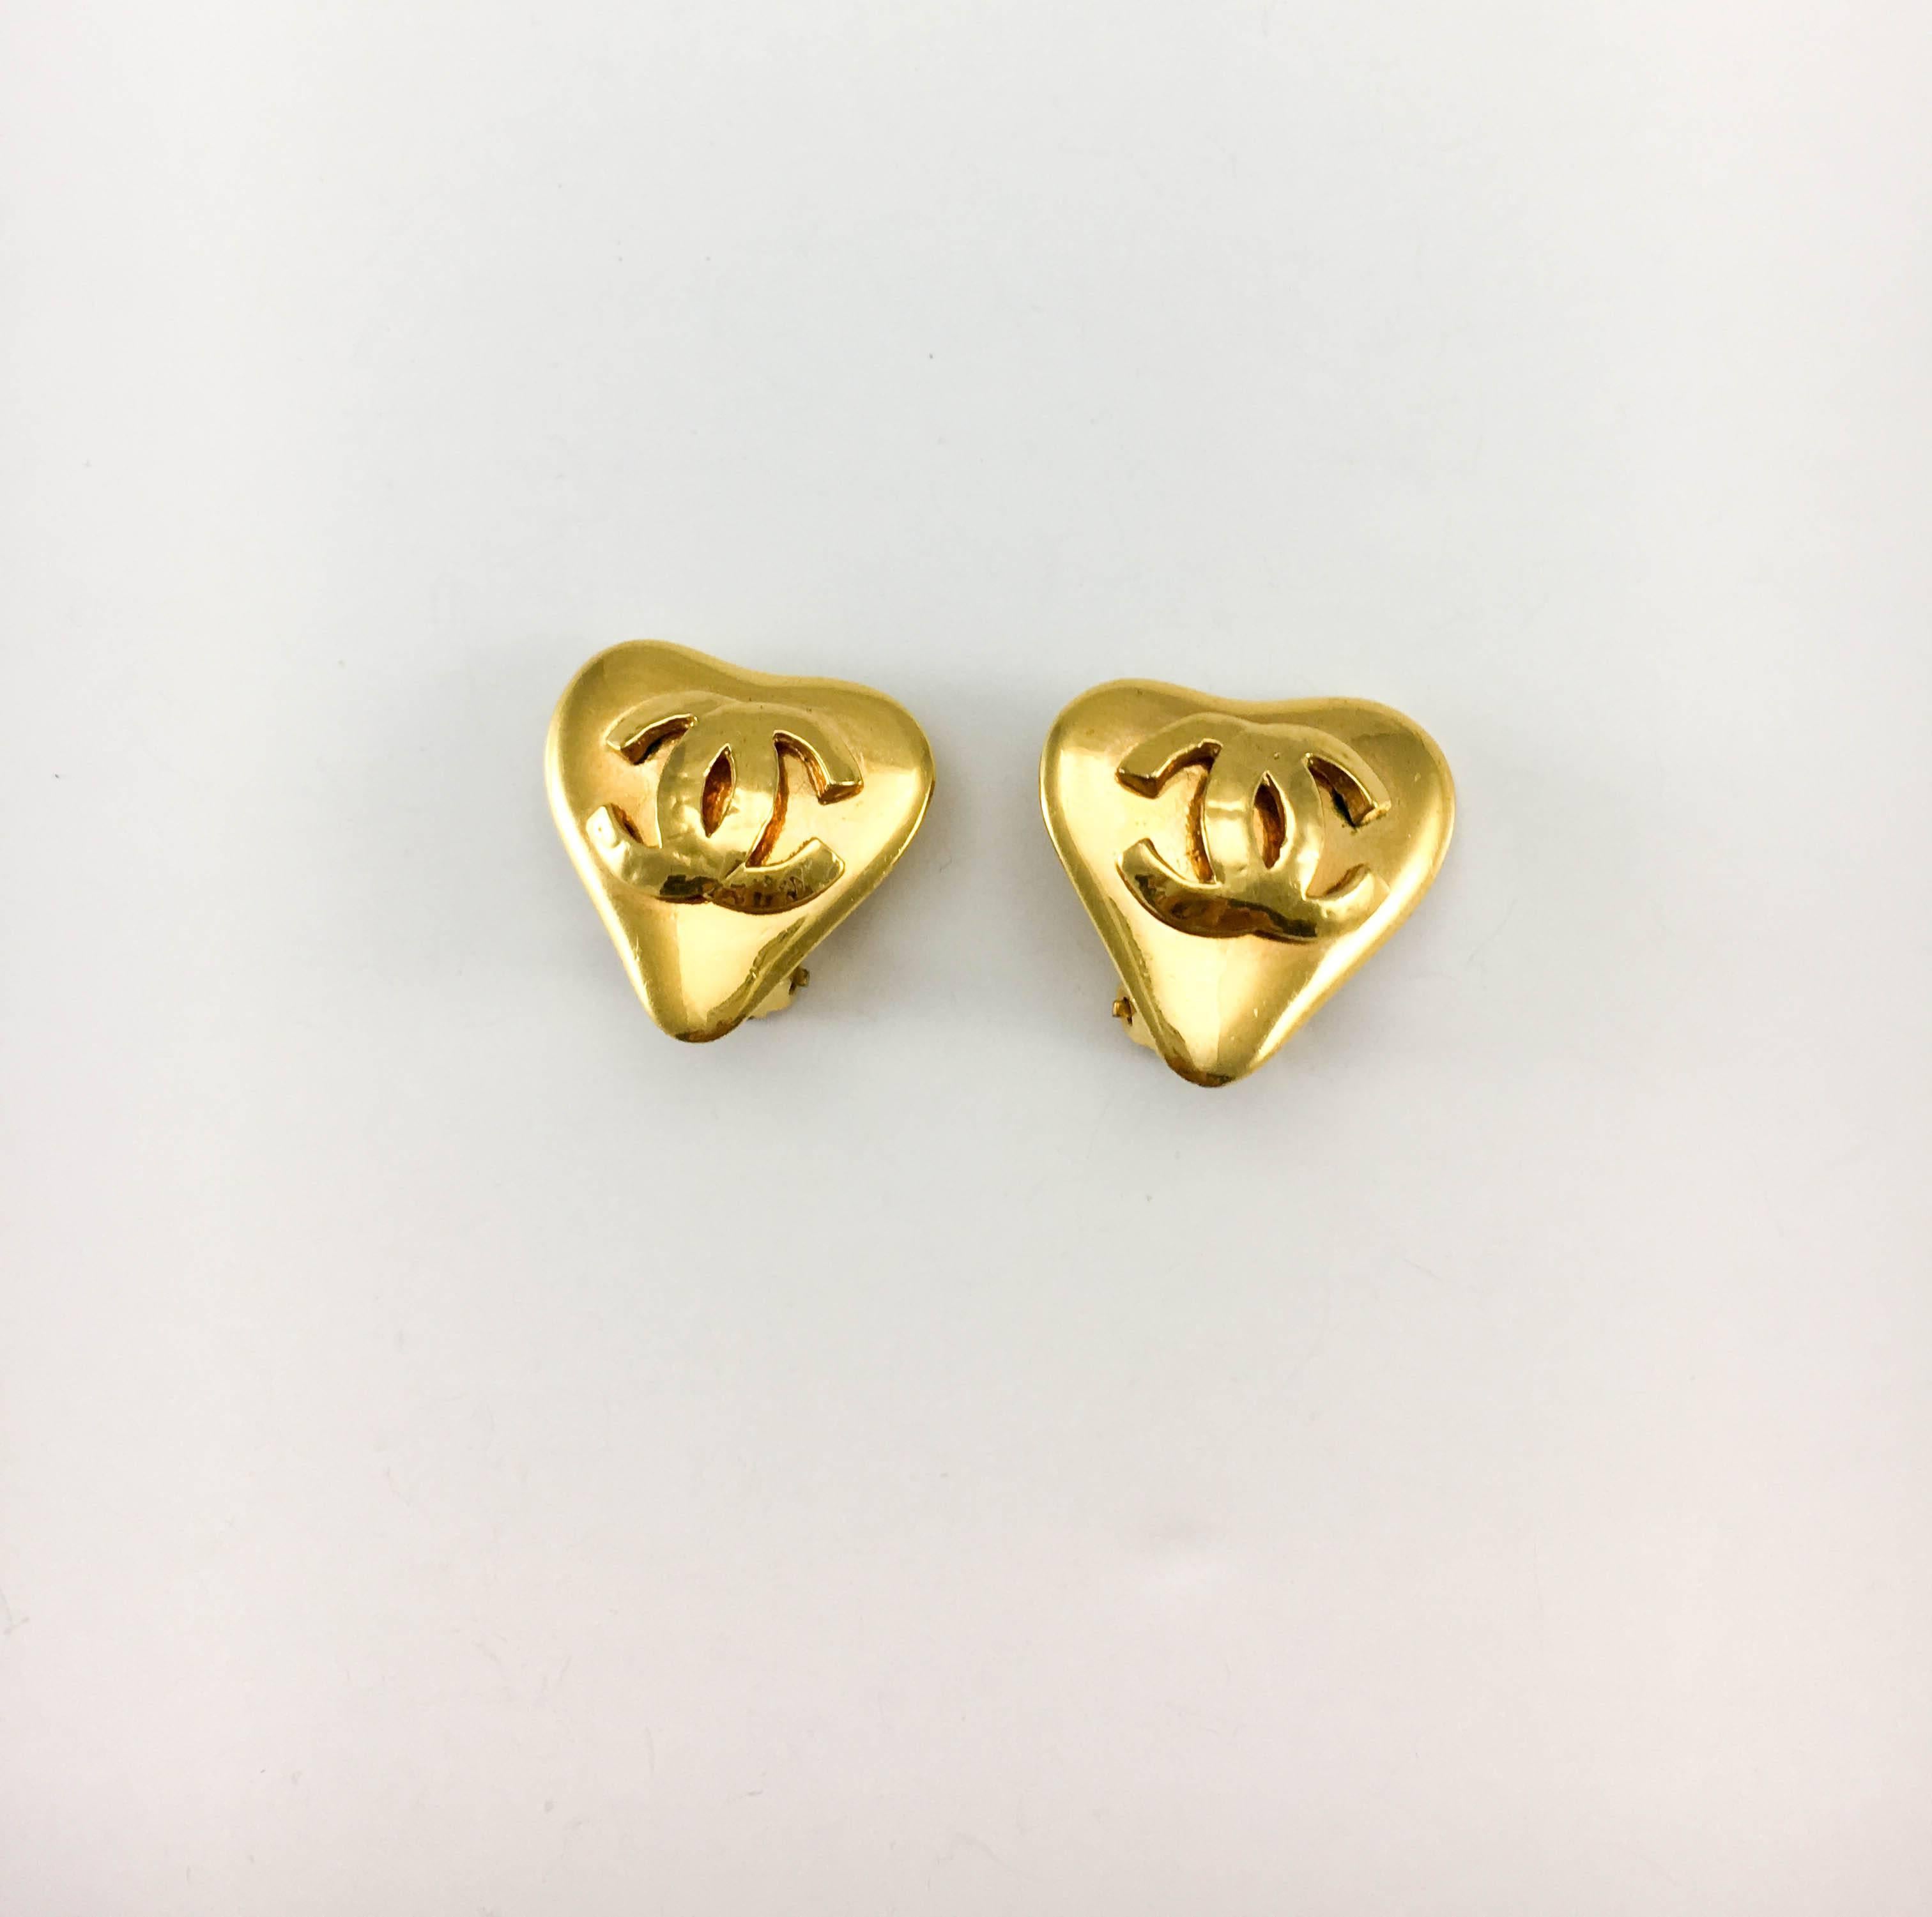 Vintage Chanel Heart-Shaped Gold-Plated Logo Clip-On Earrings. These very cute earrings by Chanel were created for the 1993 Spring / Summer collection. Gold-Plated, they are in the shape of a heart and feature the iconic ‘CC’ logo in the centre. A